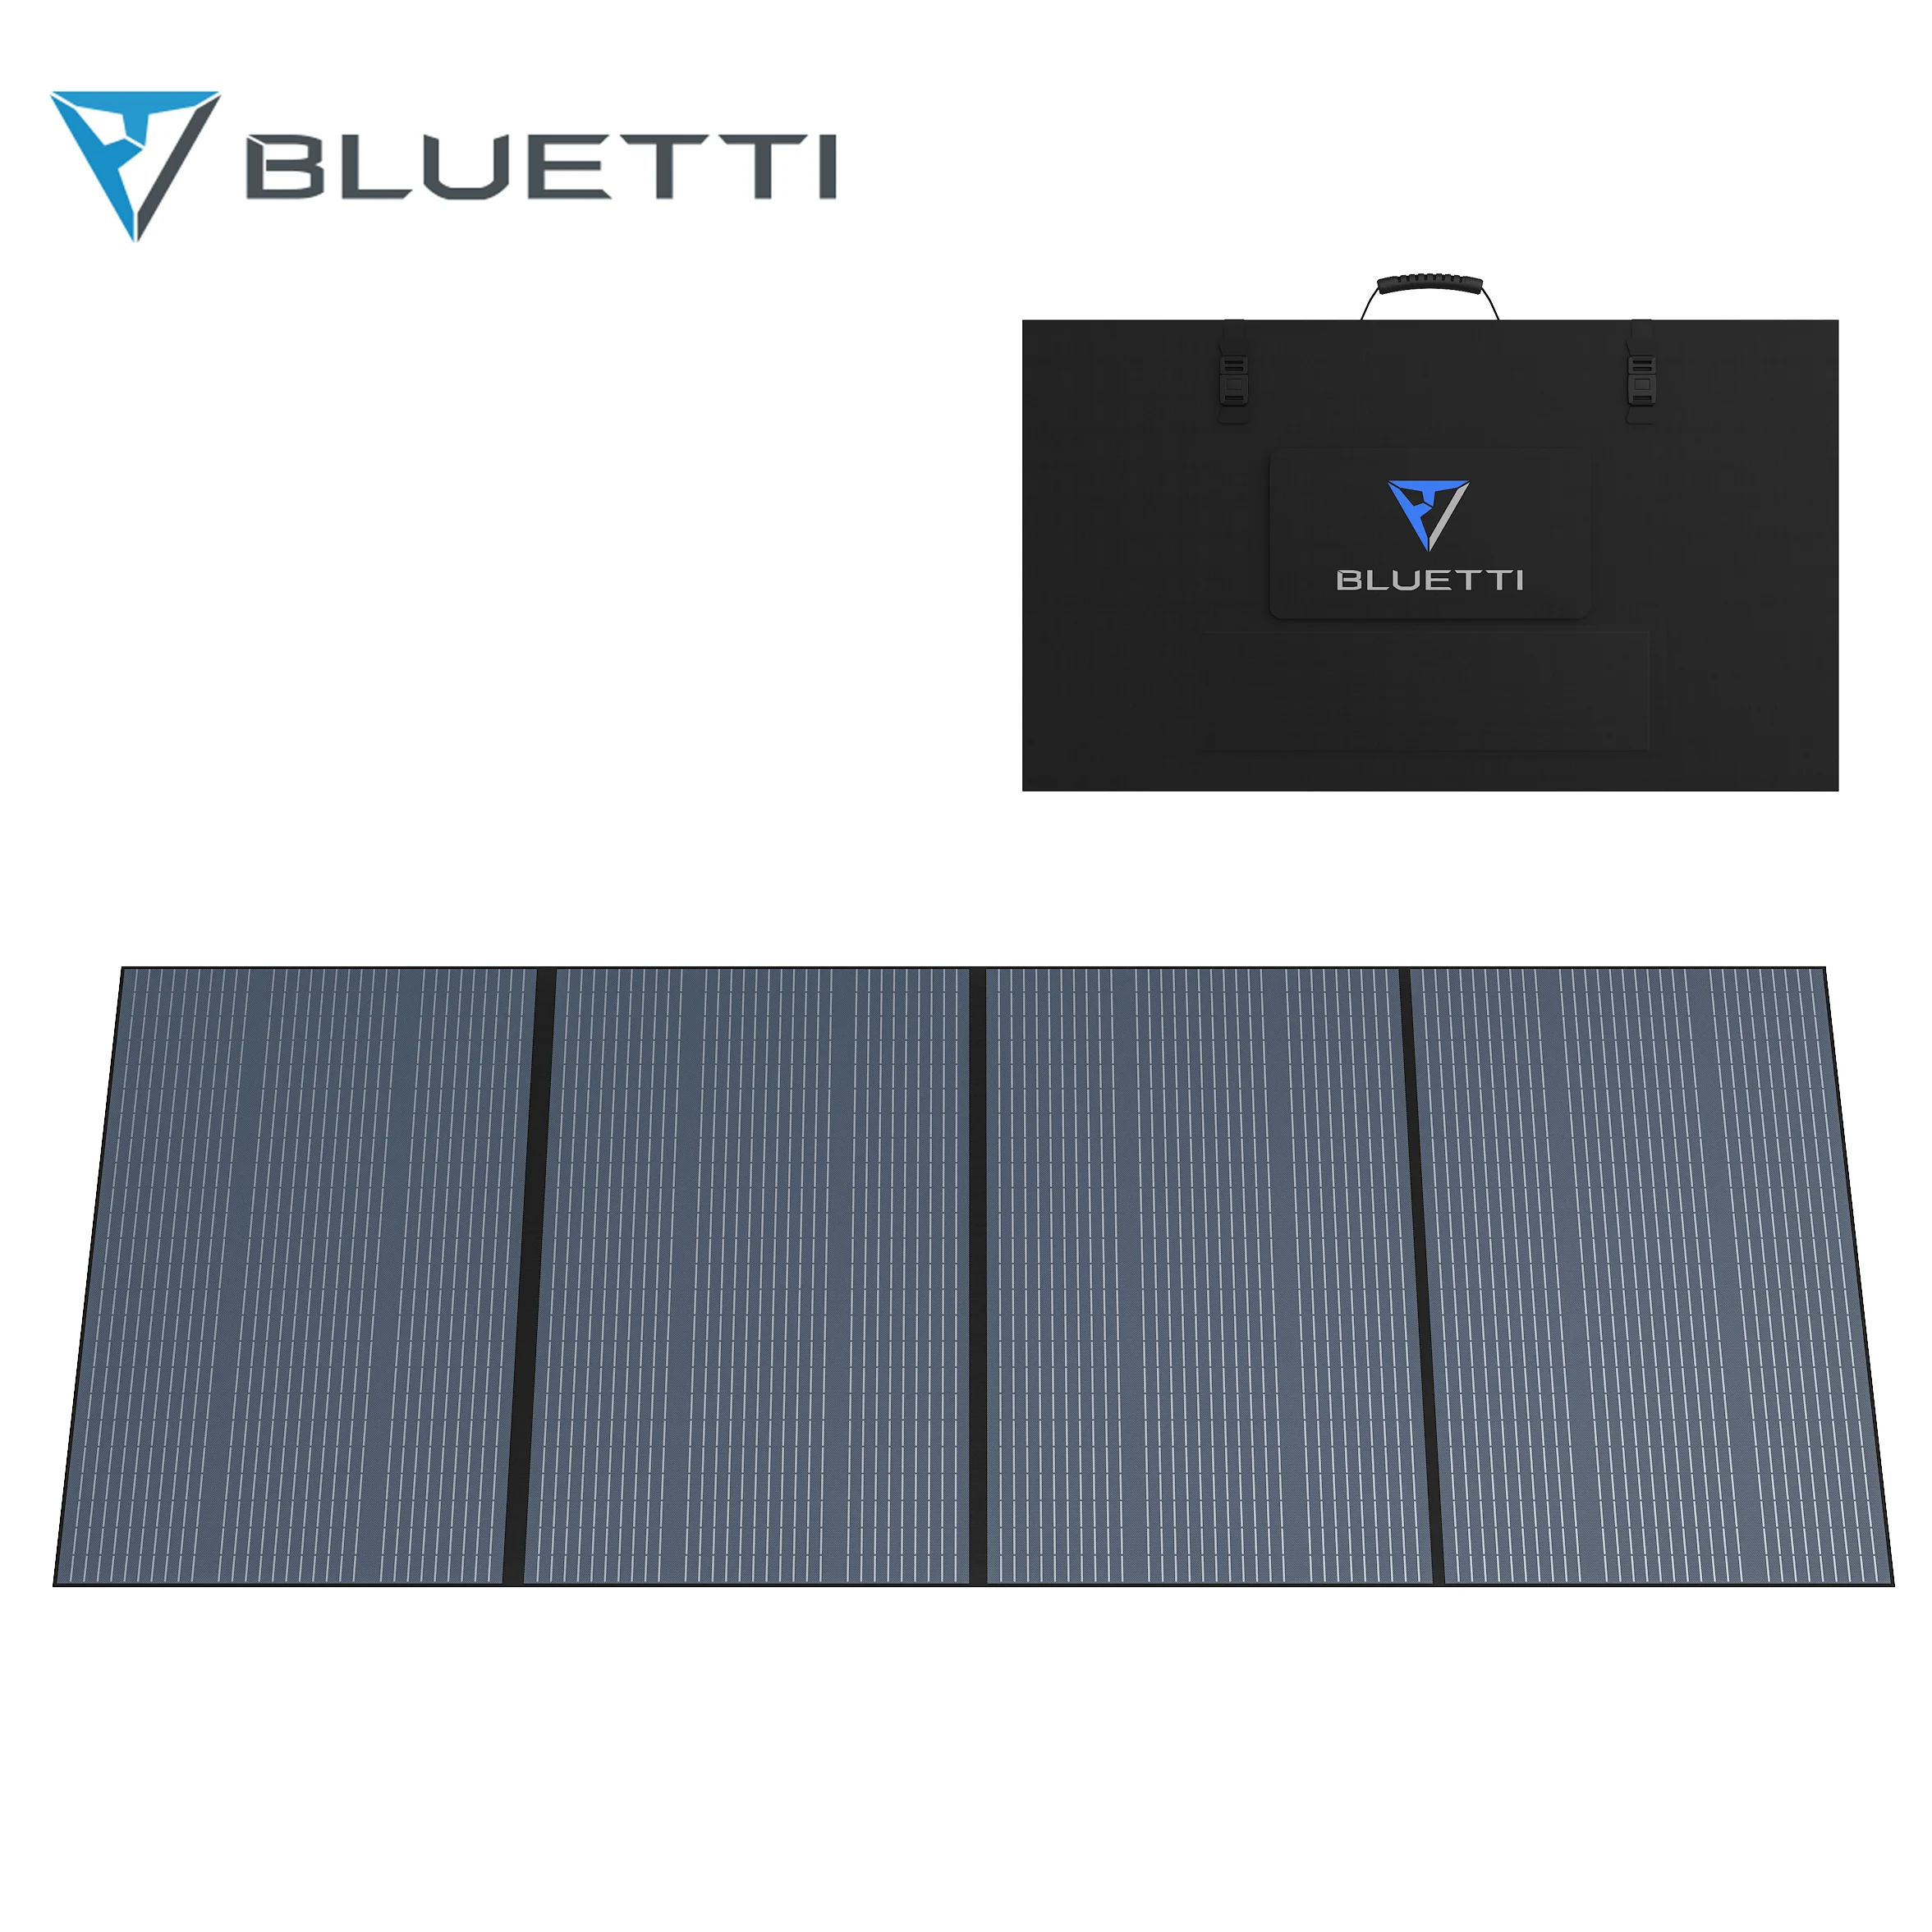 BLUETTI PV350 Solar Panel Foldable 350W Solar Panel Portable Charger With SunPower Solar Panel For Home Outdoor Hiking Camping